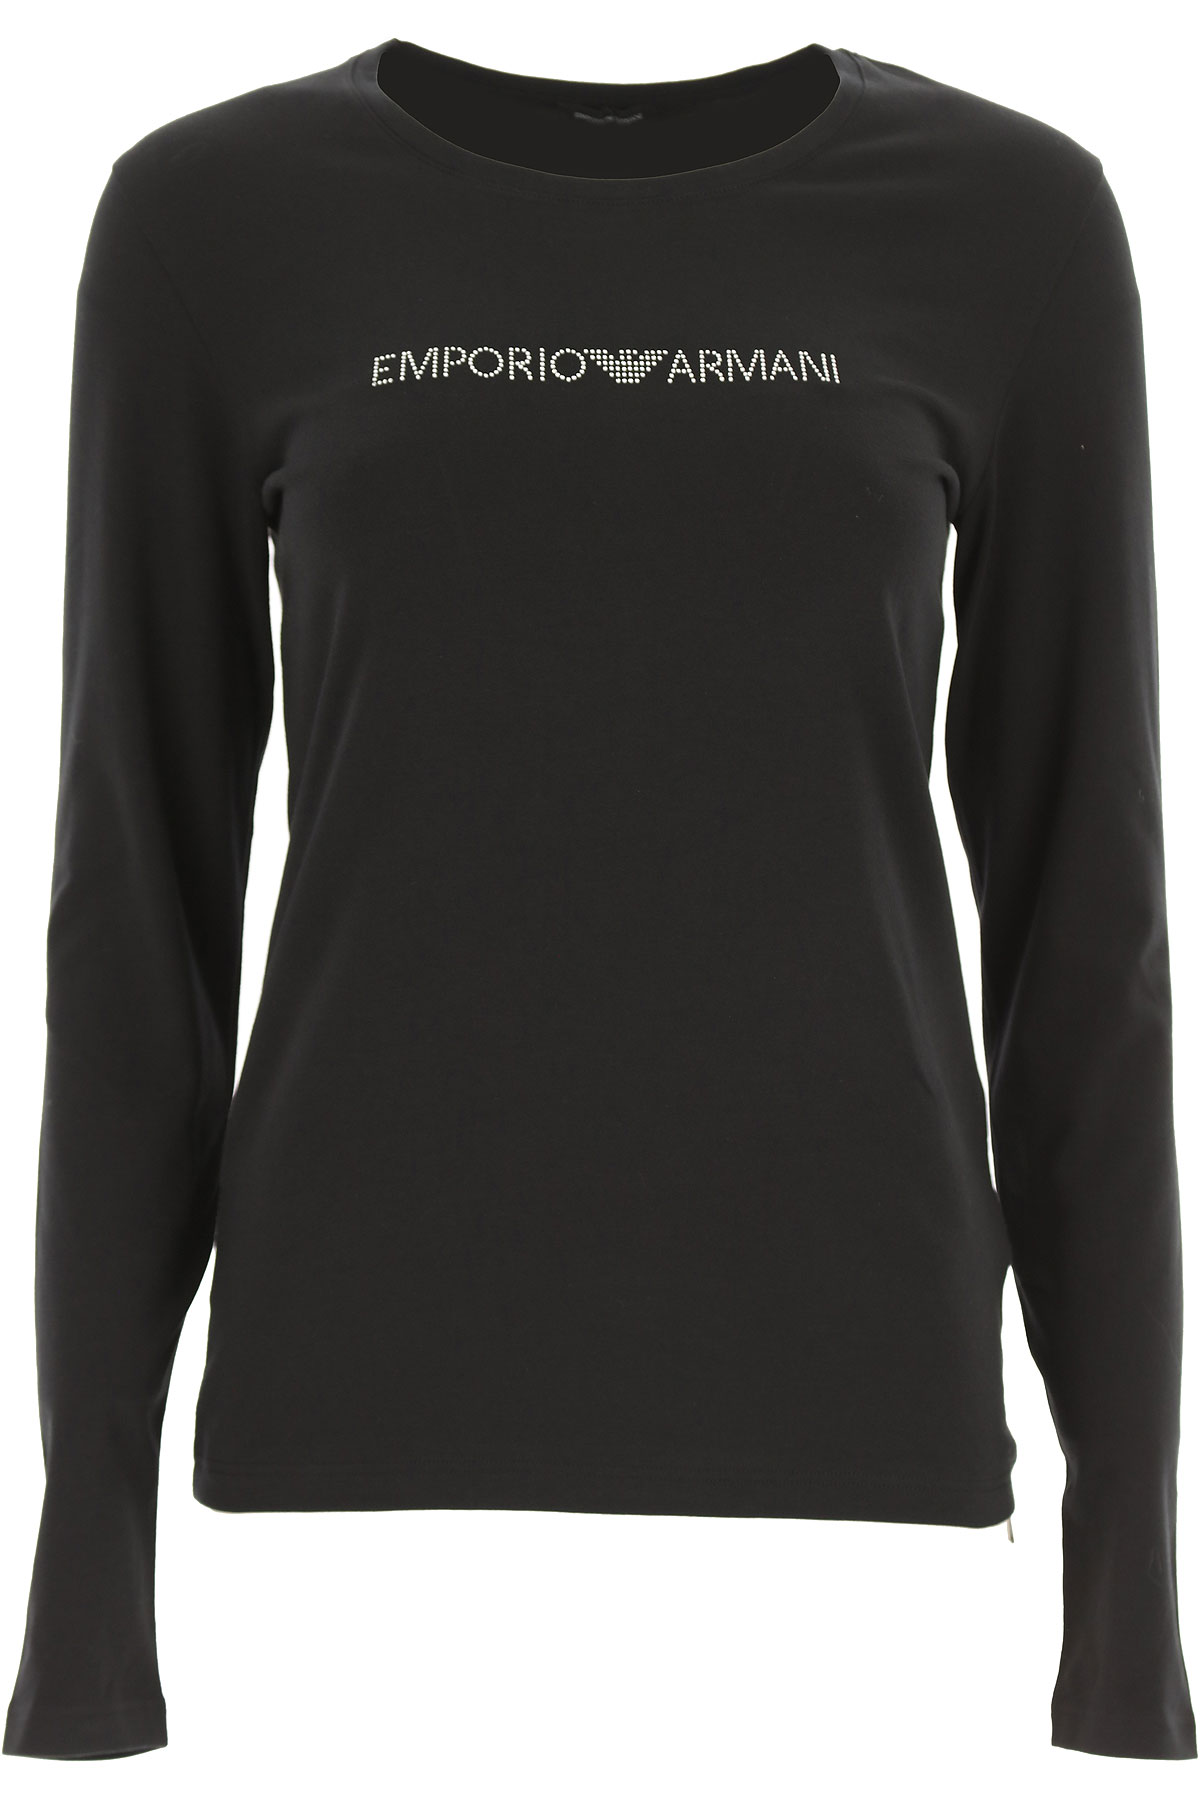 Womens Clothing Emporio Armani, Style code: 163229-0a263-00020